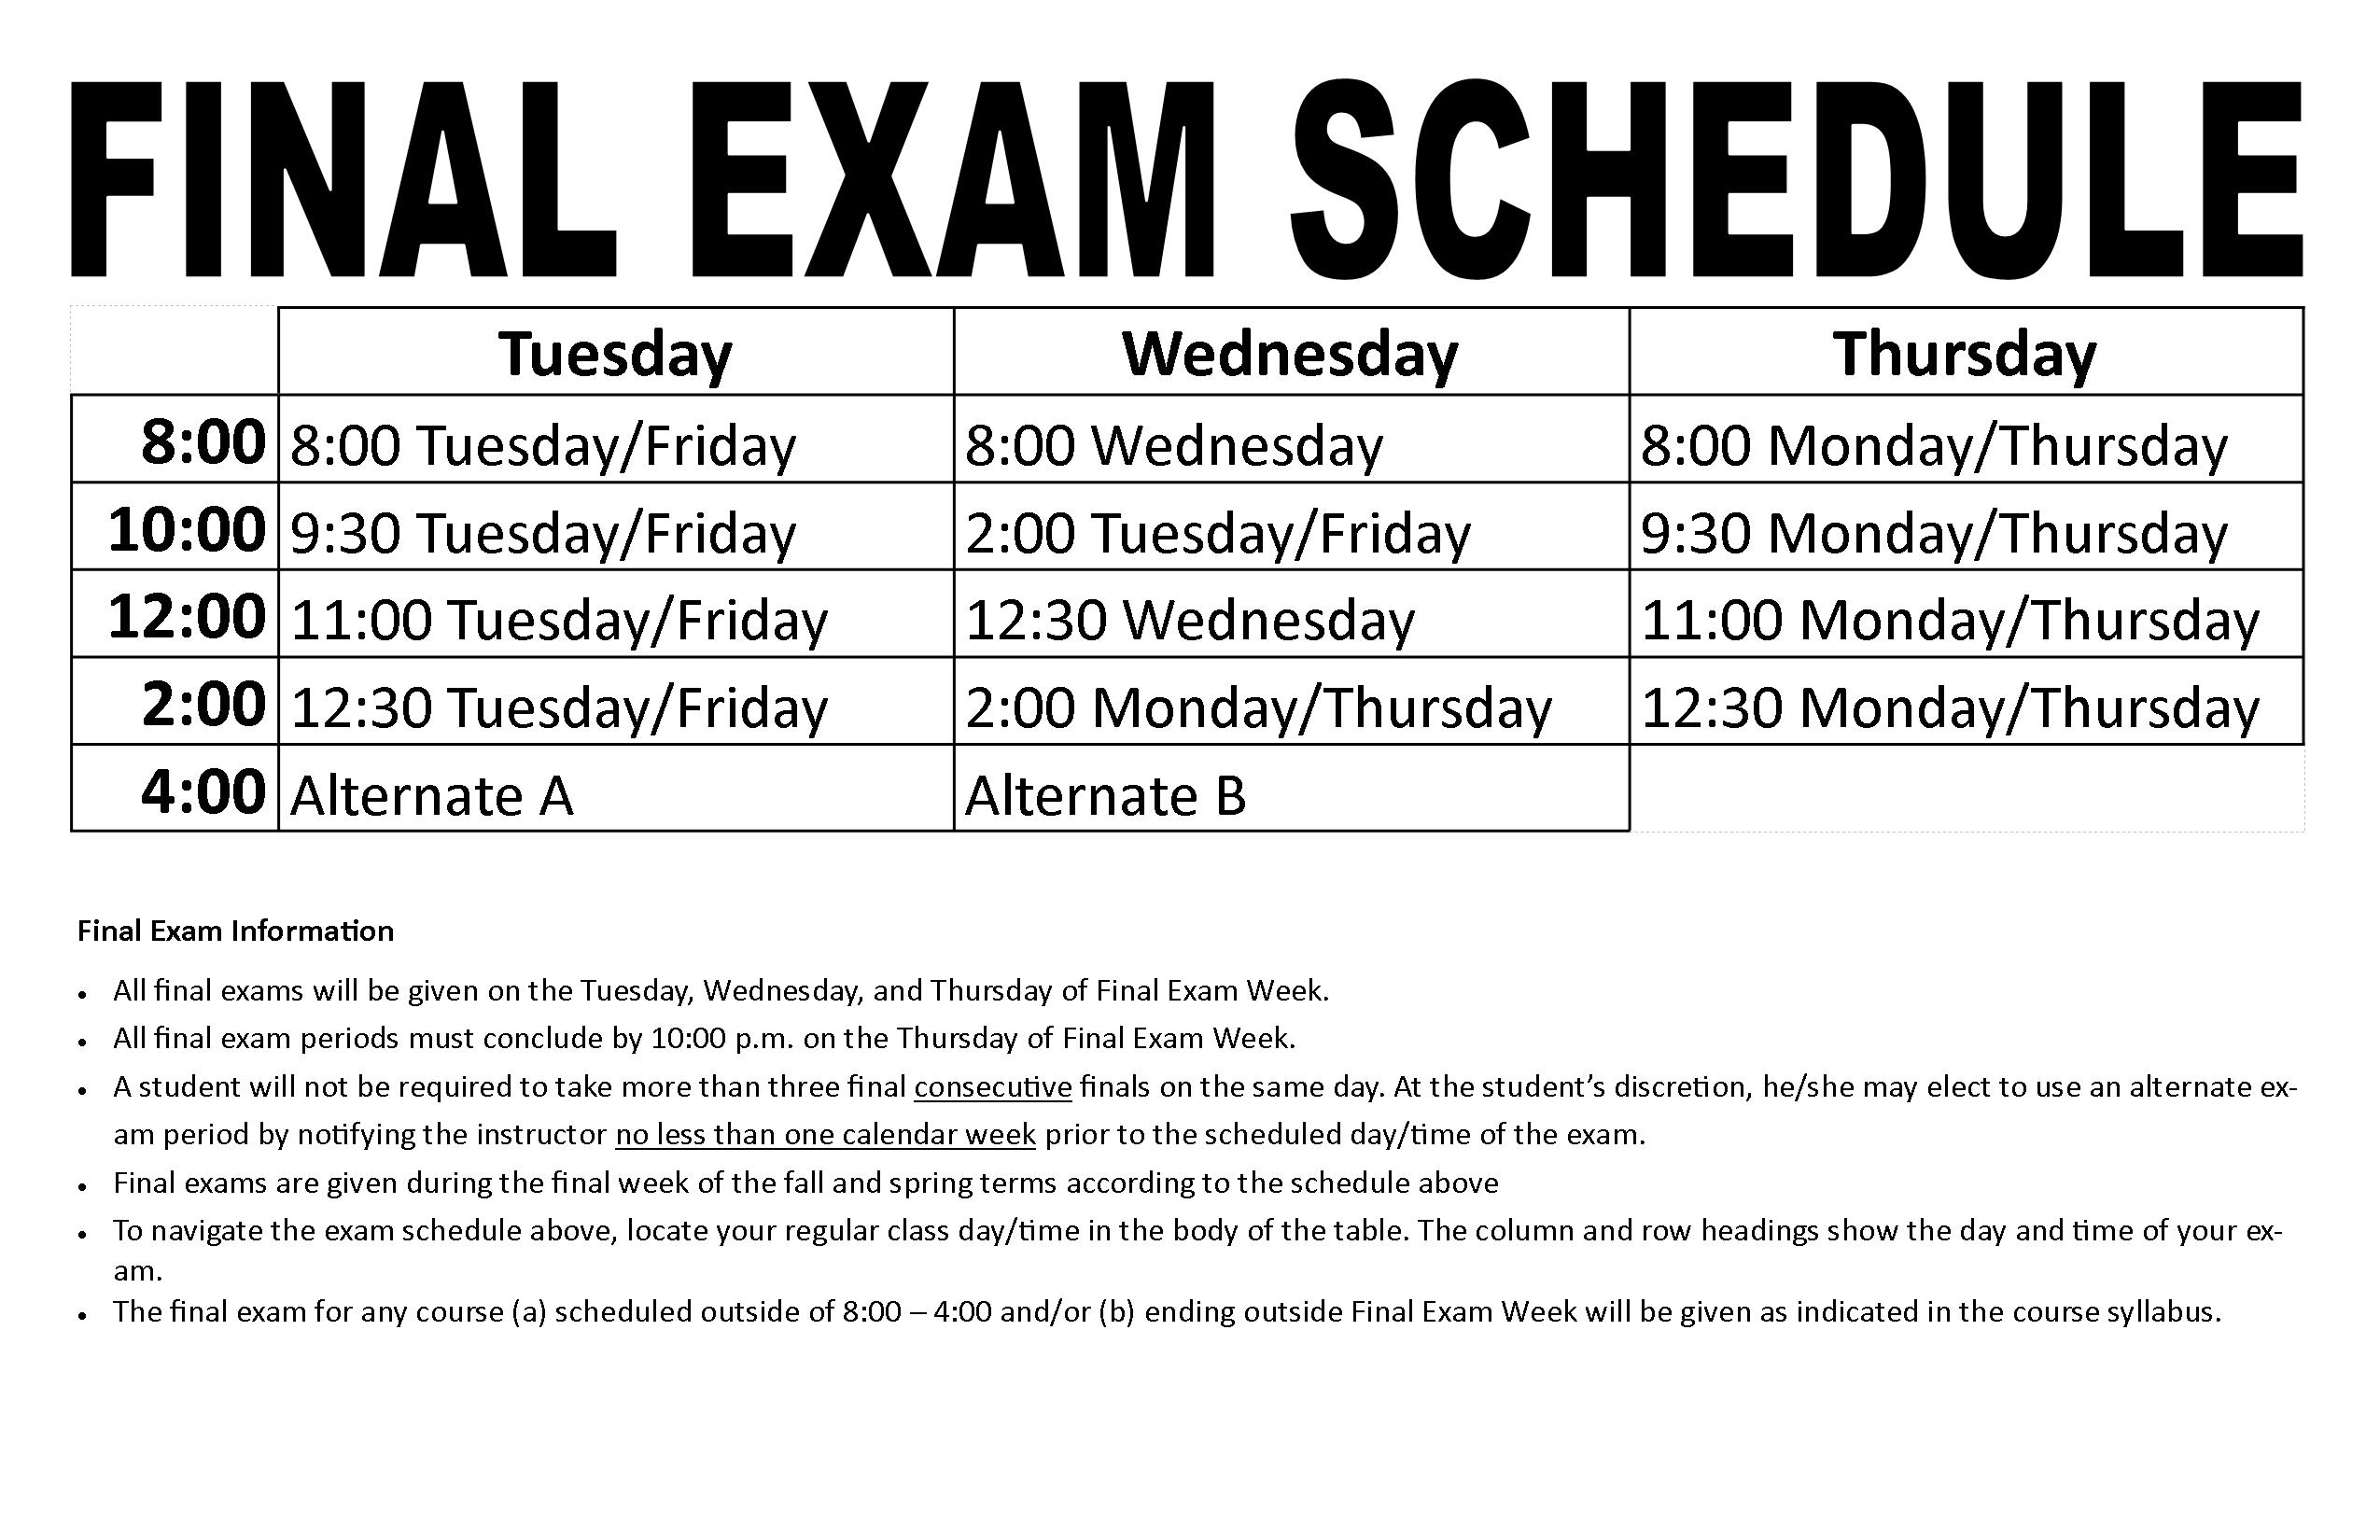 Iium Final Exam Schedule - Exams will take place thursday, may 7 through wednesday, may 13